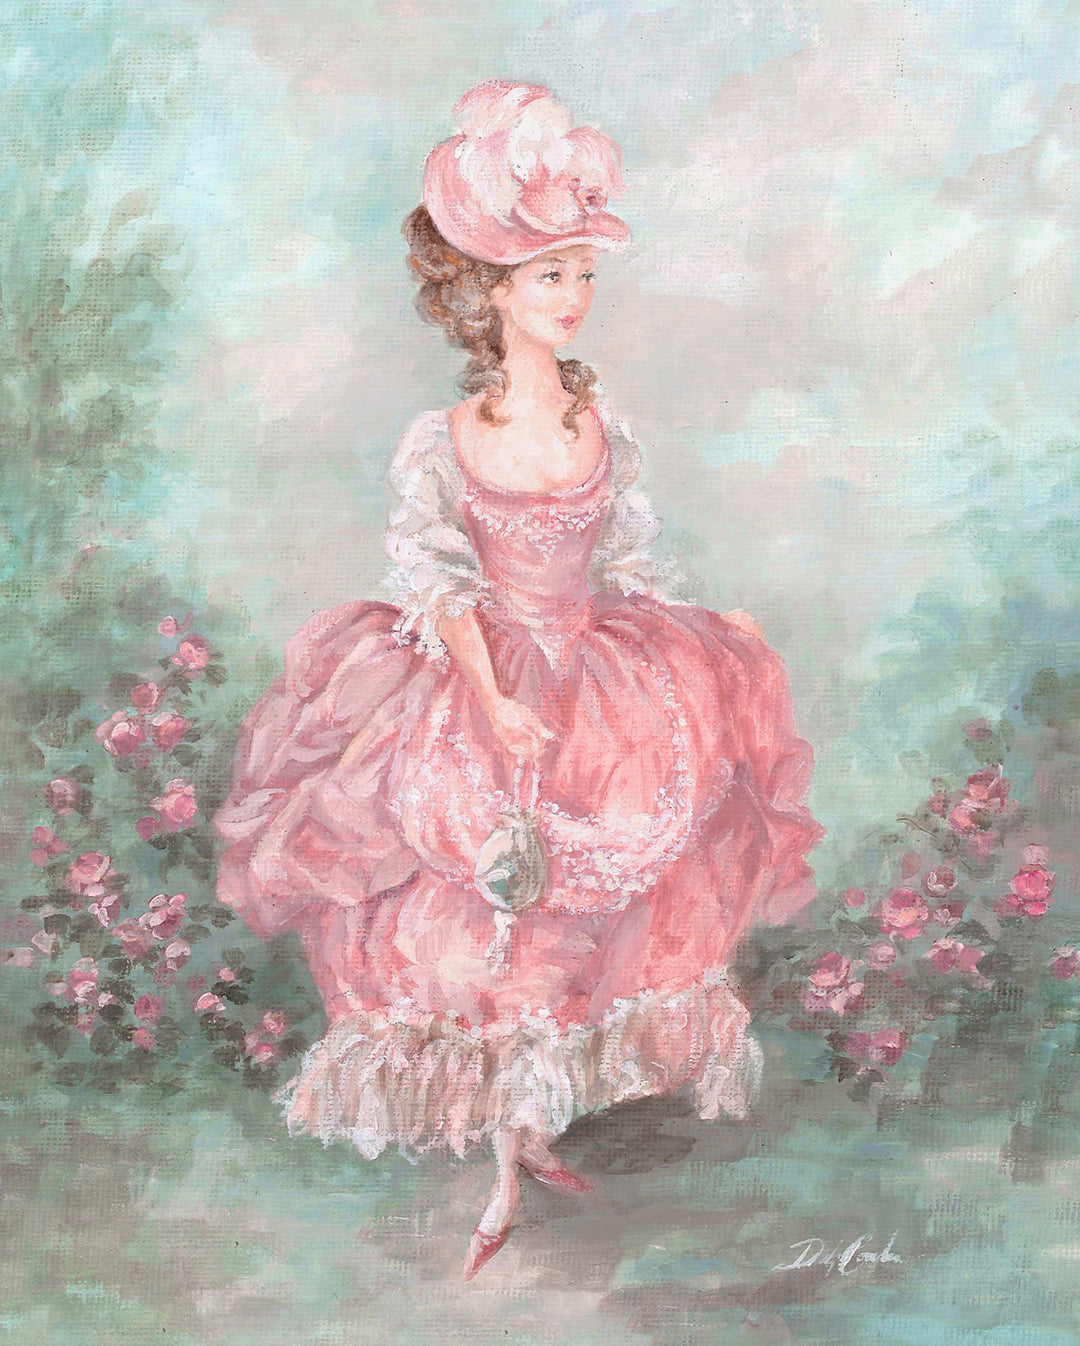 Marie Antoinette inspired painting for vintage French fashion